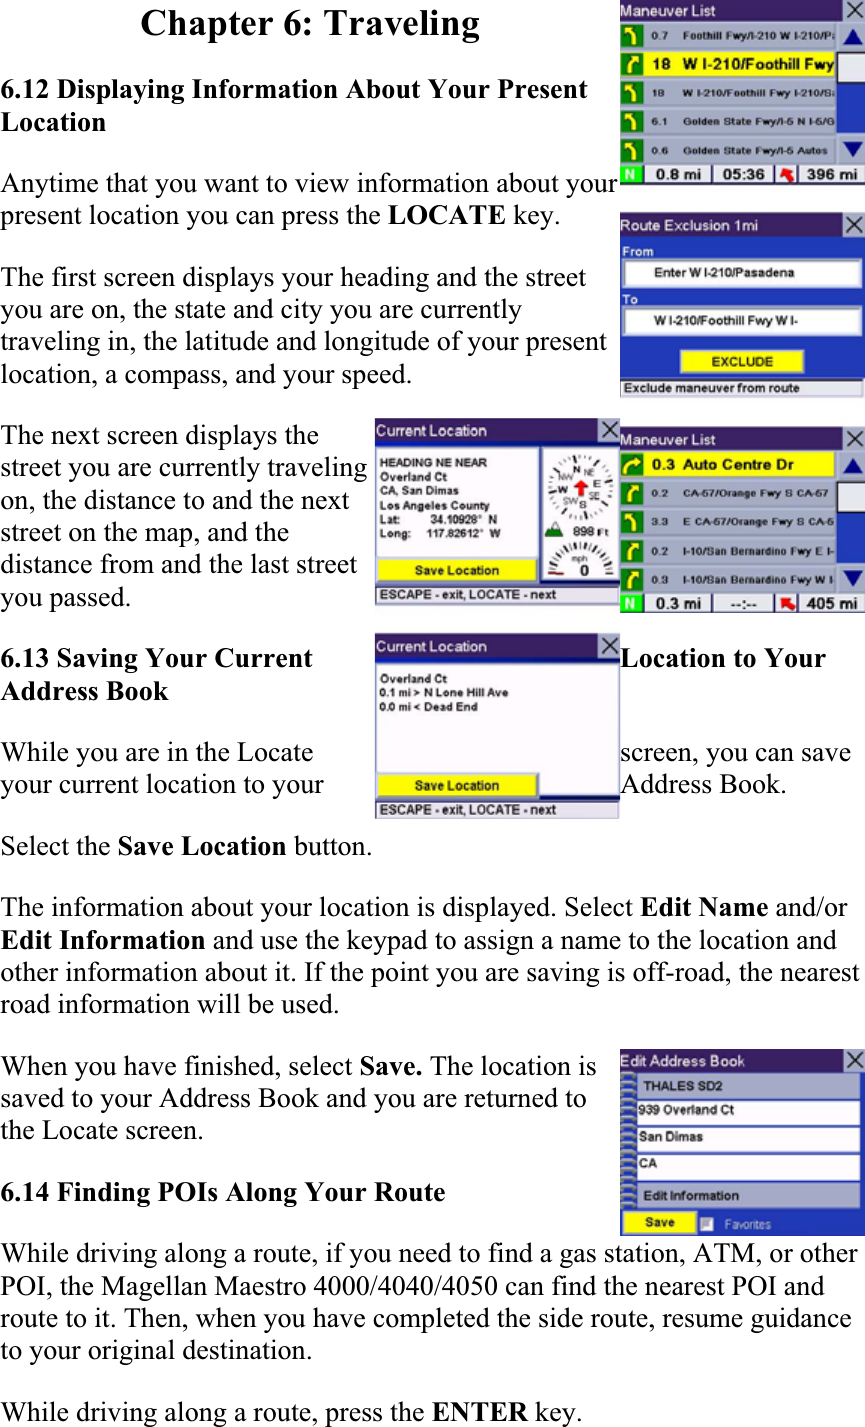 Chapter 6: Traveling 6.12 Displaying Information About Your Present Location  Anytime that you want to view information about your present location you can press the LOCATE key.The first screen displays your heading and the street you are on, the state and city you are currently traveling in, the latitude and longitude of your present location, a compass, and your speed.  The next screen displays the street you are currently traveling on, the distance to and the next street on the map, and the distance from and the last street you passed.6.13 Saving Your Current  Location to Your Address Book  While you are in the Locate  screen, you can save your current location to your  Address Book.Select the Save Location button.The information about your location is displayed. Select Edit Name and/or Edit Information and use the keypad to assign a name to the location and other information about it. If the point you are saving is off-road, the nearest road information will be used.  When you have finished, select Save. The location is saved to your Address Book and you are returned to the Locate screen.  6.14 Finding POIs Along Your Route  While driving along a route, if you need to find a gas station, ATM, or other POI, the Magellan Maestro 4000/4040/4050 can find the nearest POI and route to it. Then, when you have completed the side route, resume guidance to your original destination.  While driving along a route, press the ENTER key.